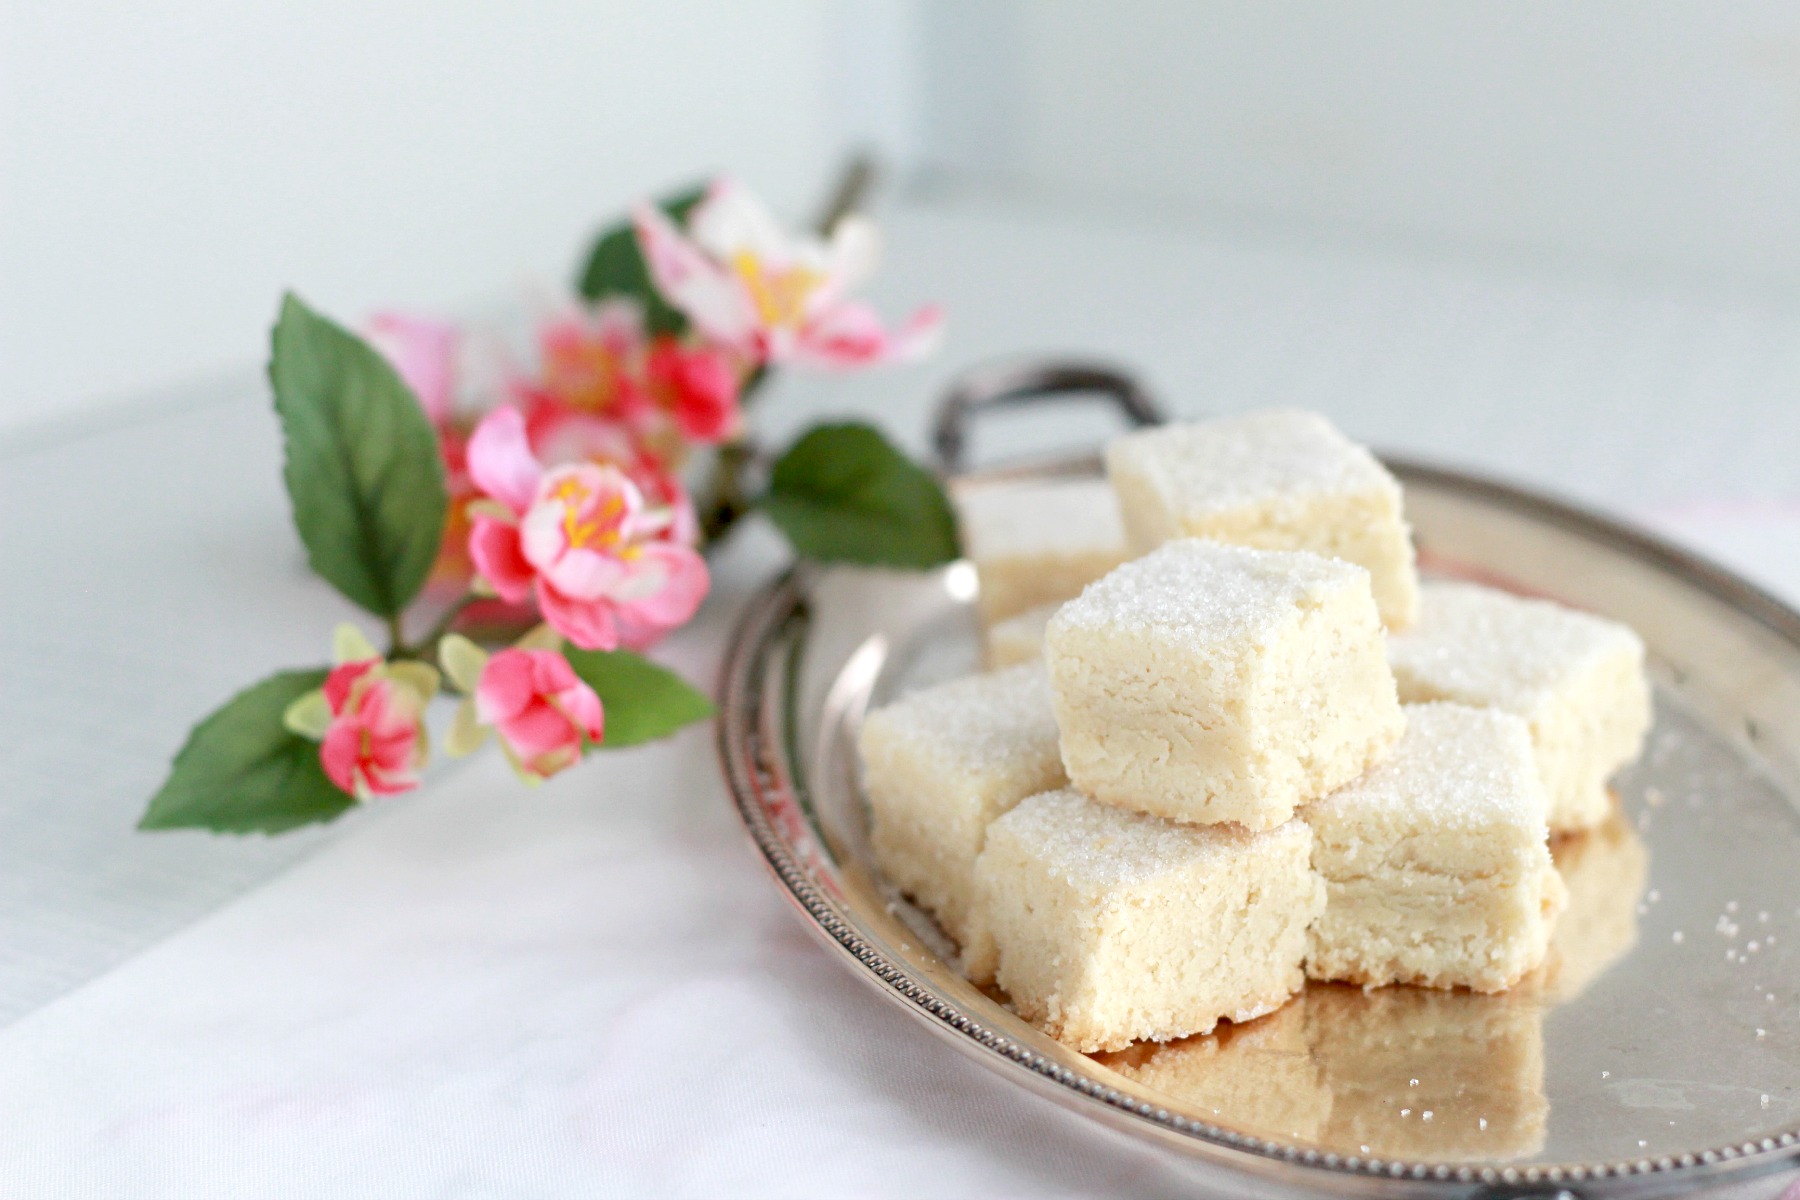 Call them biscuits or cookies, shortbread are delicious morsels of crumbly, buttery and delicate sweetness. Easy recipe for classic treats drizzled with or without lemon glaze.